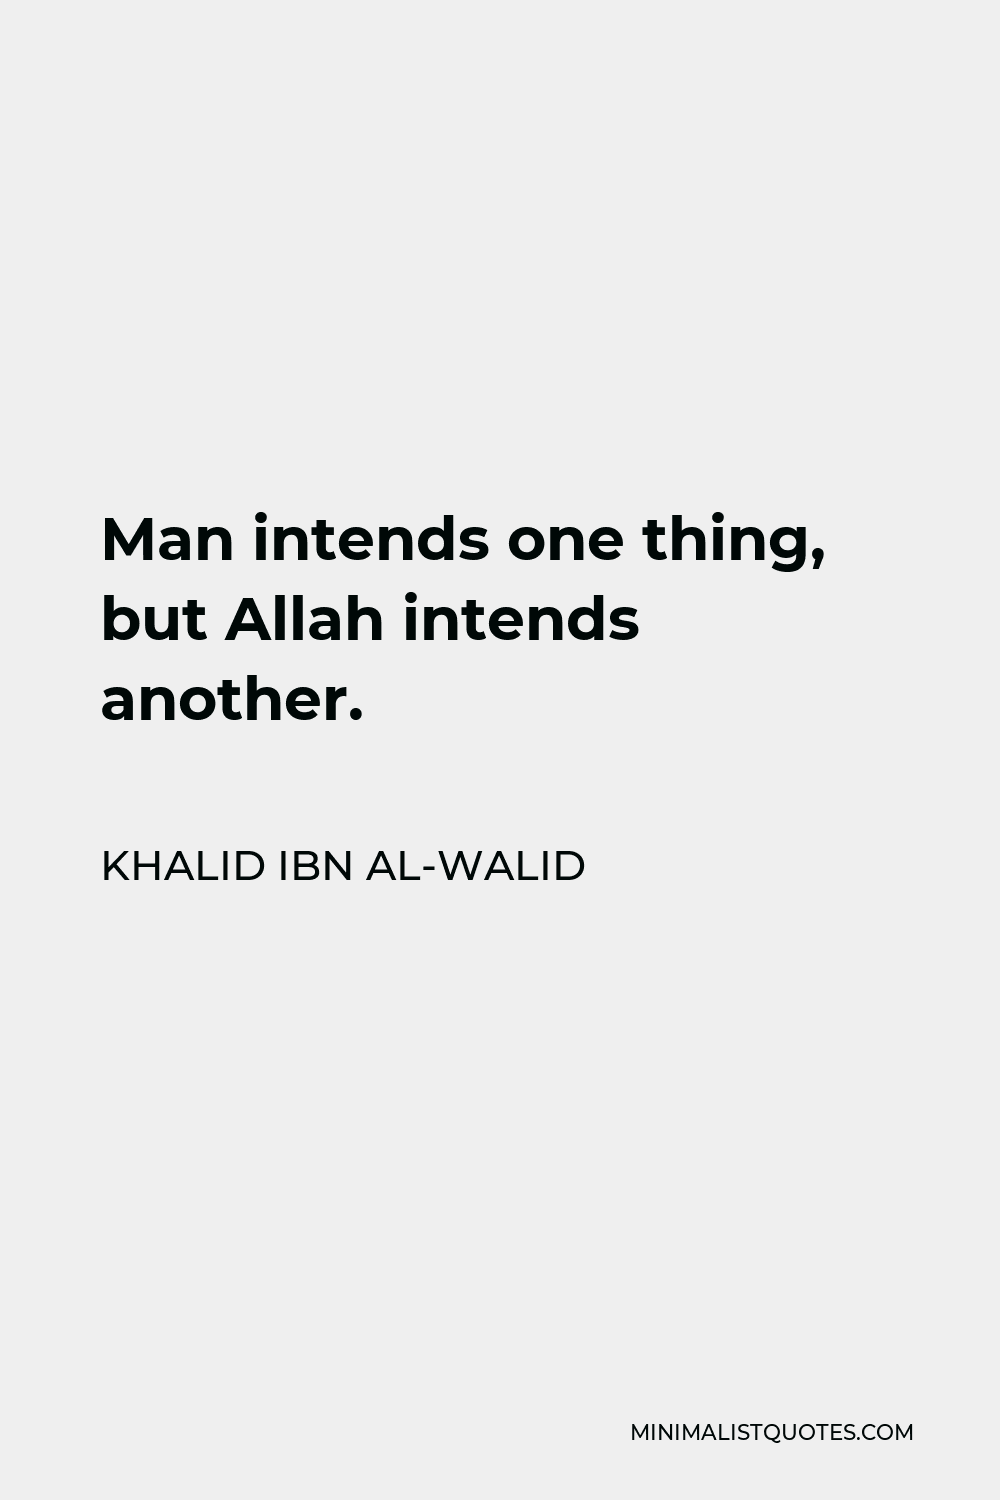 Khalid ibn al-Walid Quote - Man intends one thing, but Allah intends another.